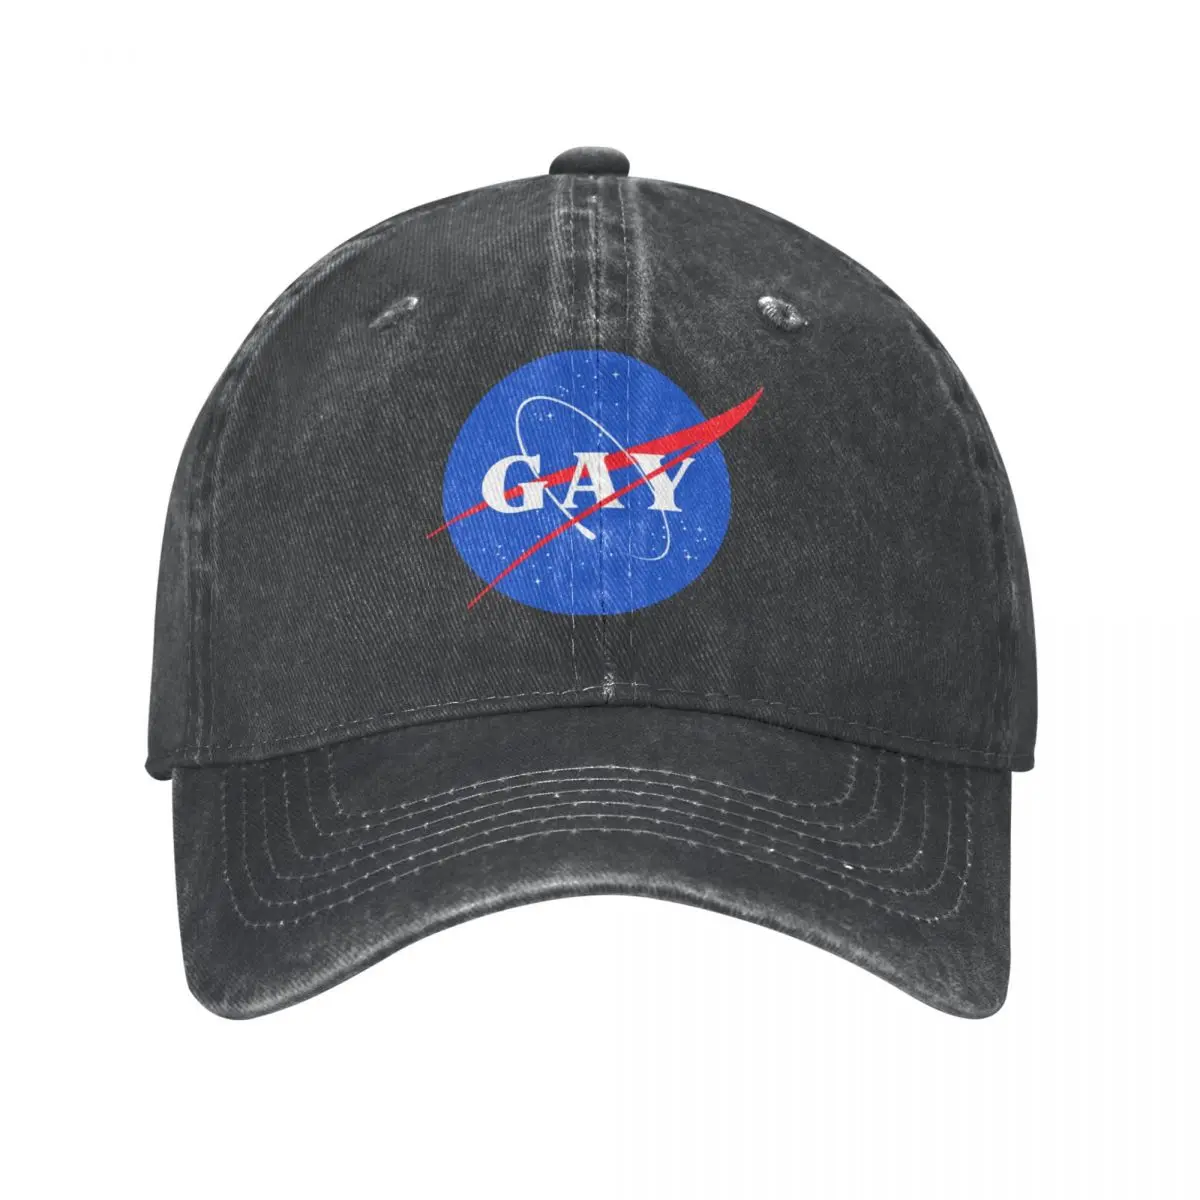 

Gay Pride Logo Baseball Caps Retro Distressed Cotton Space Gay Queer LGBT Snapback Hat Outdoor Summer Unstructured Soft Caps Hat